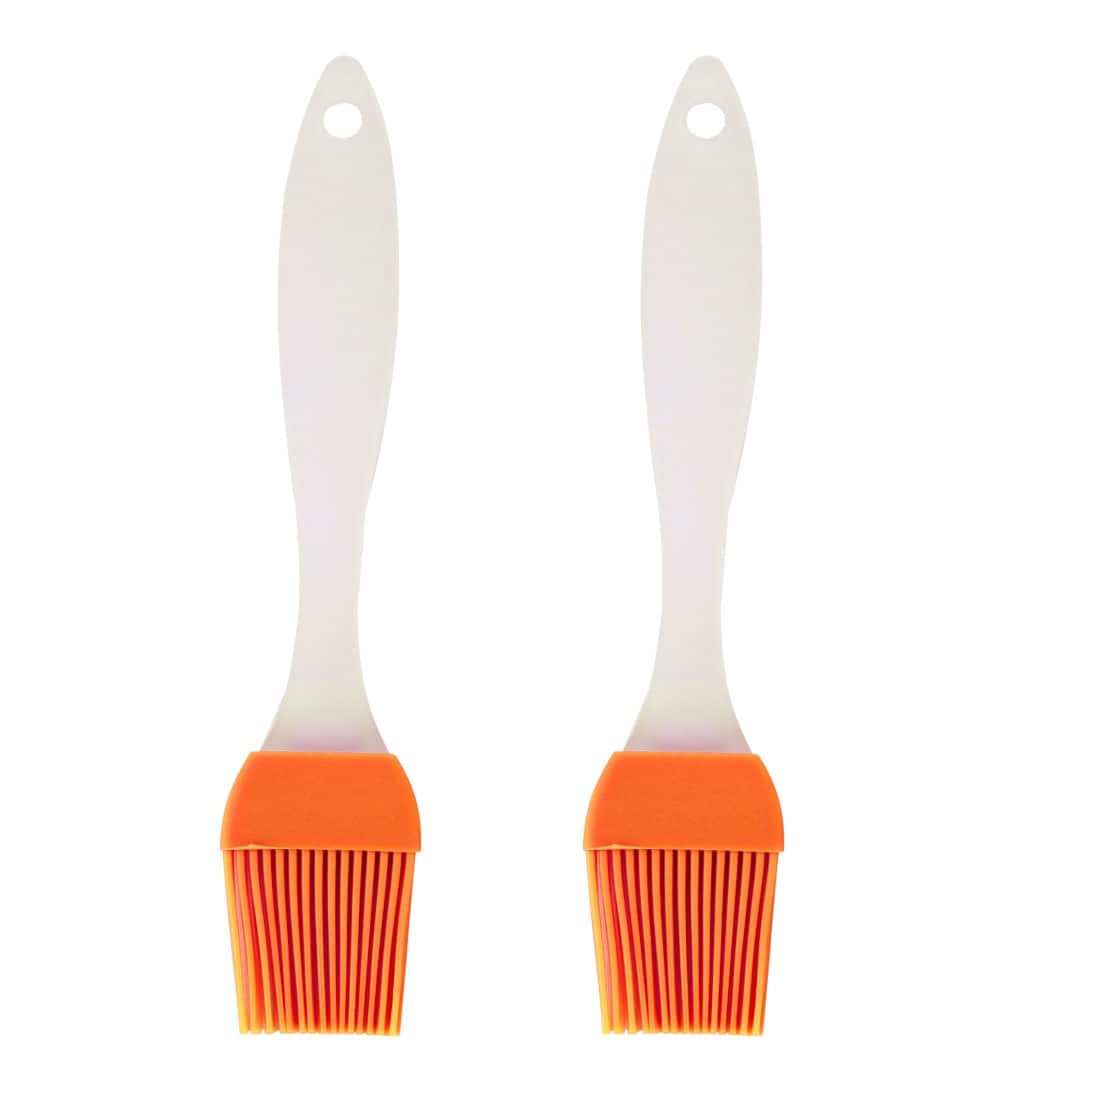 2pcs Silicone Pastry Brush Oil Brush Cookware Heat Resistant Non